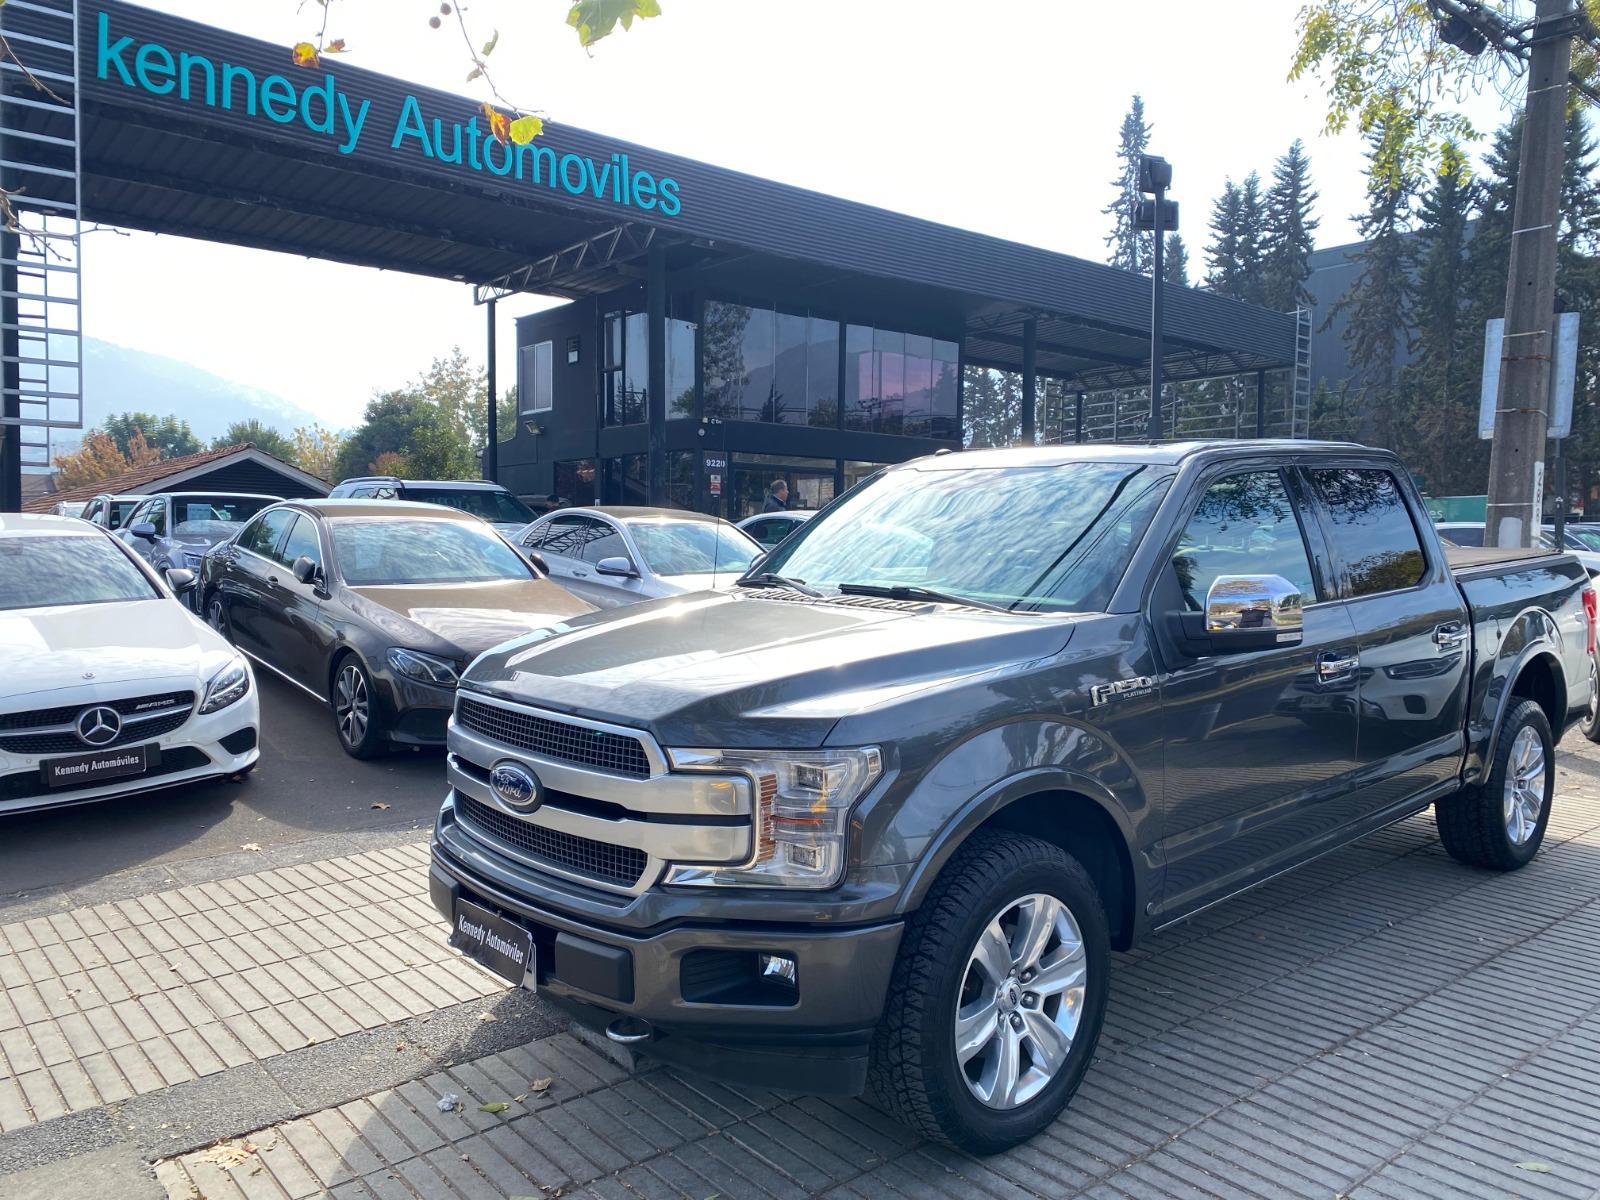 FORD F-150 3.5 Platinum Auto EcoBoost 4WD 2019 Impecable - KENNEDY AUTOMOVILES